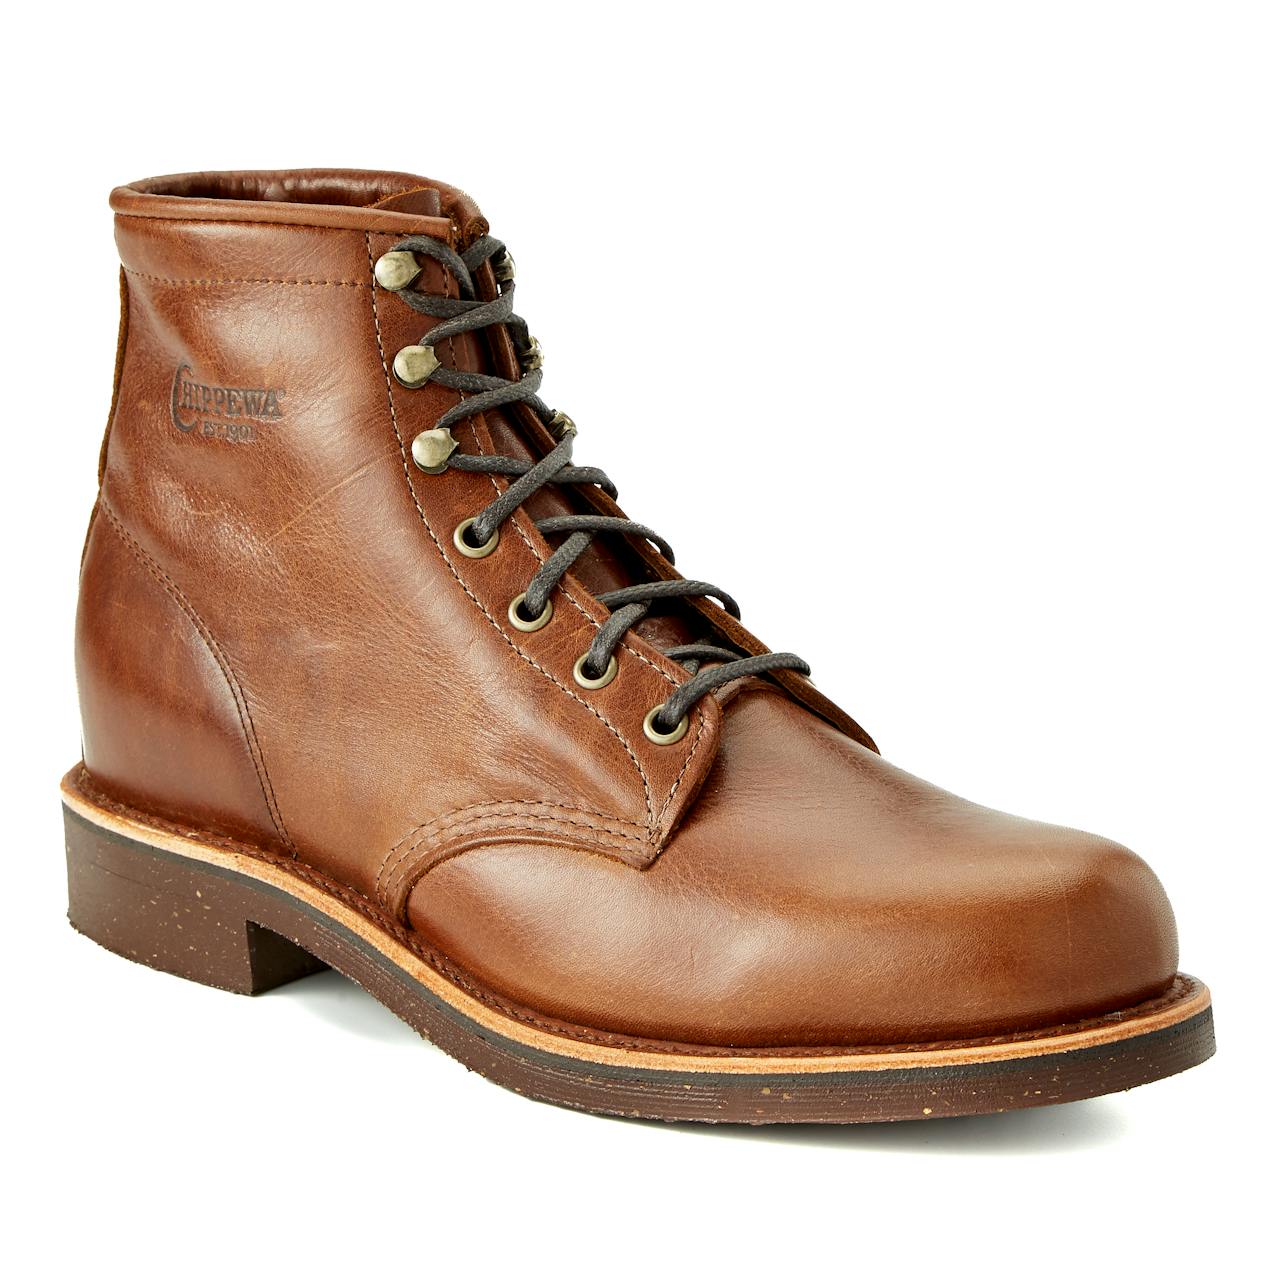 Chippewa Service Boot - Exclusive